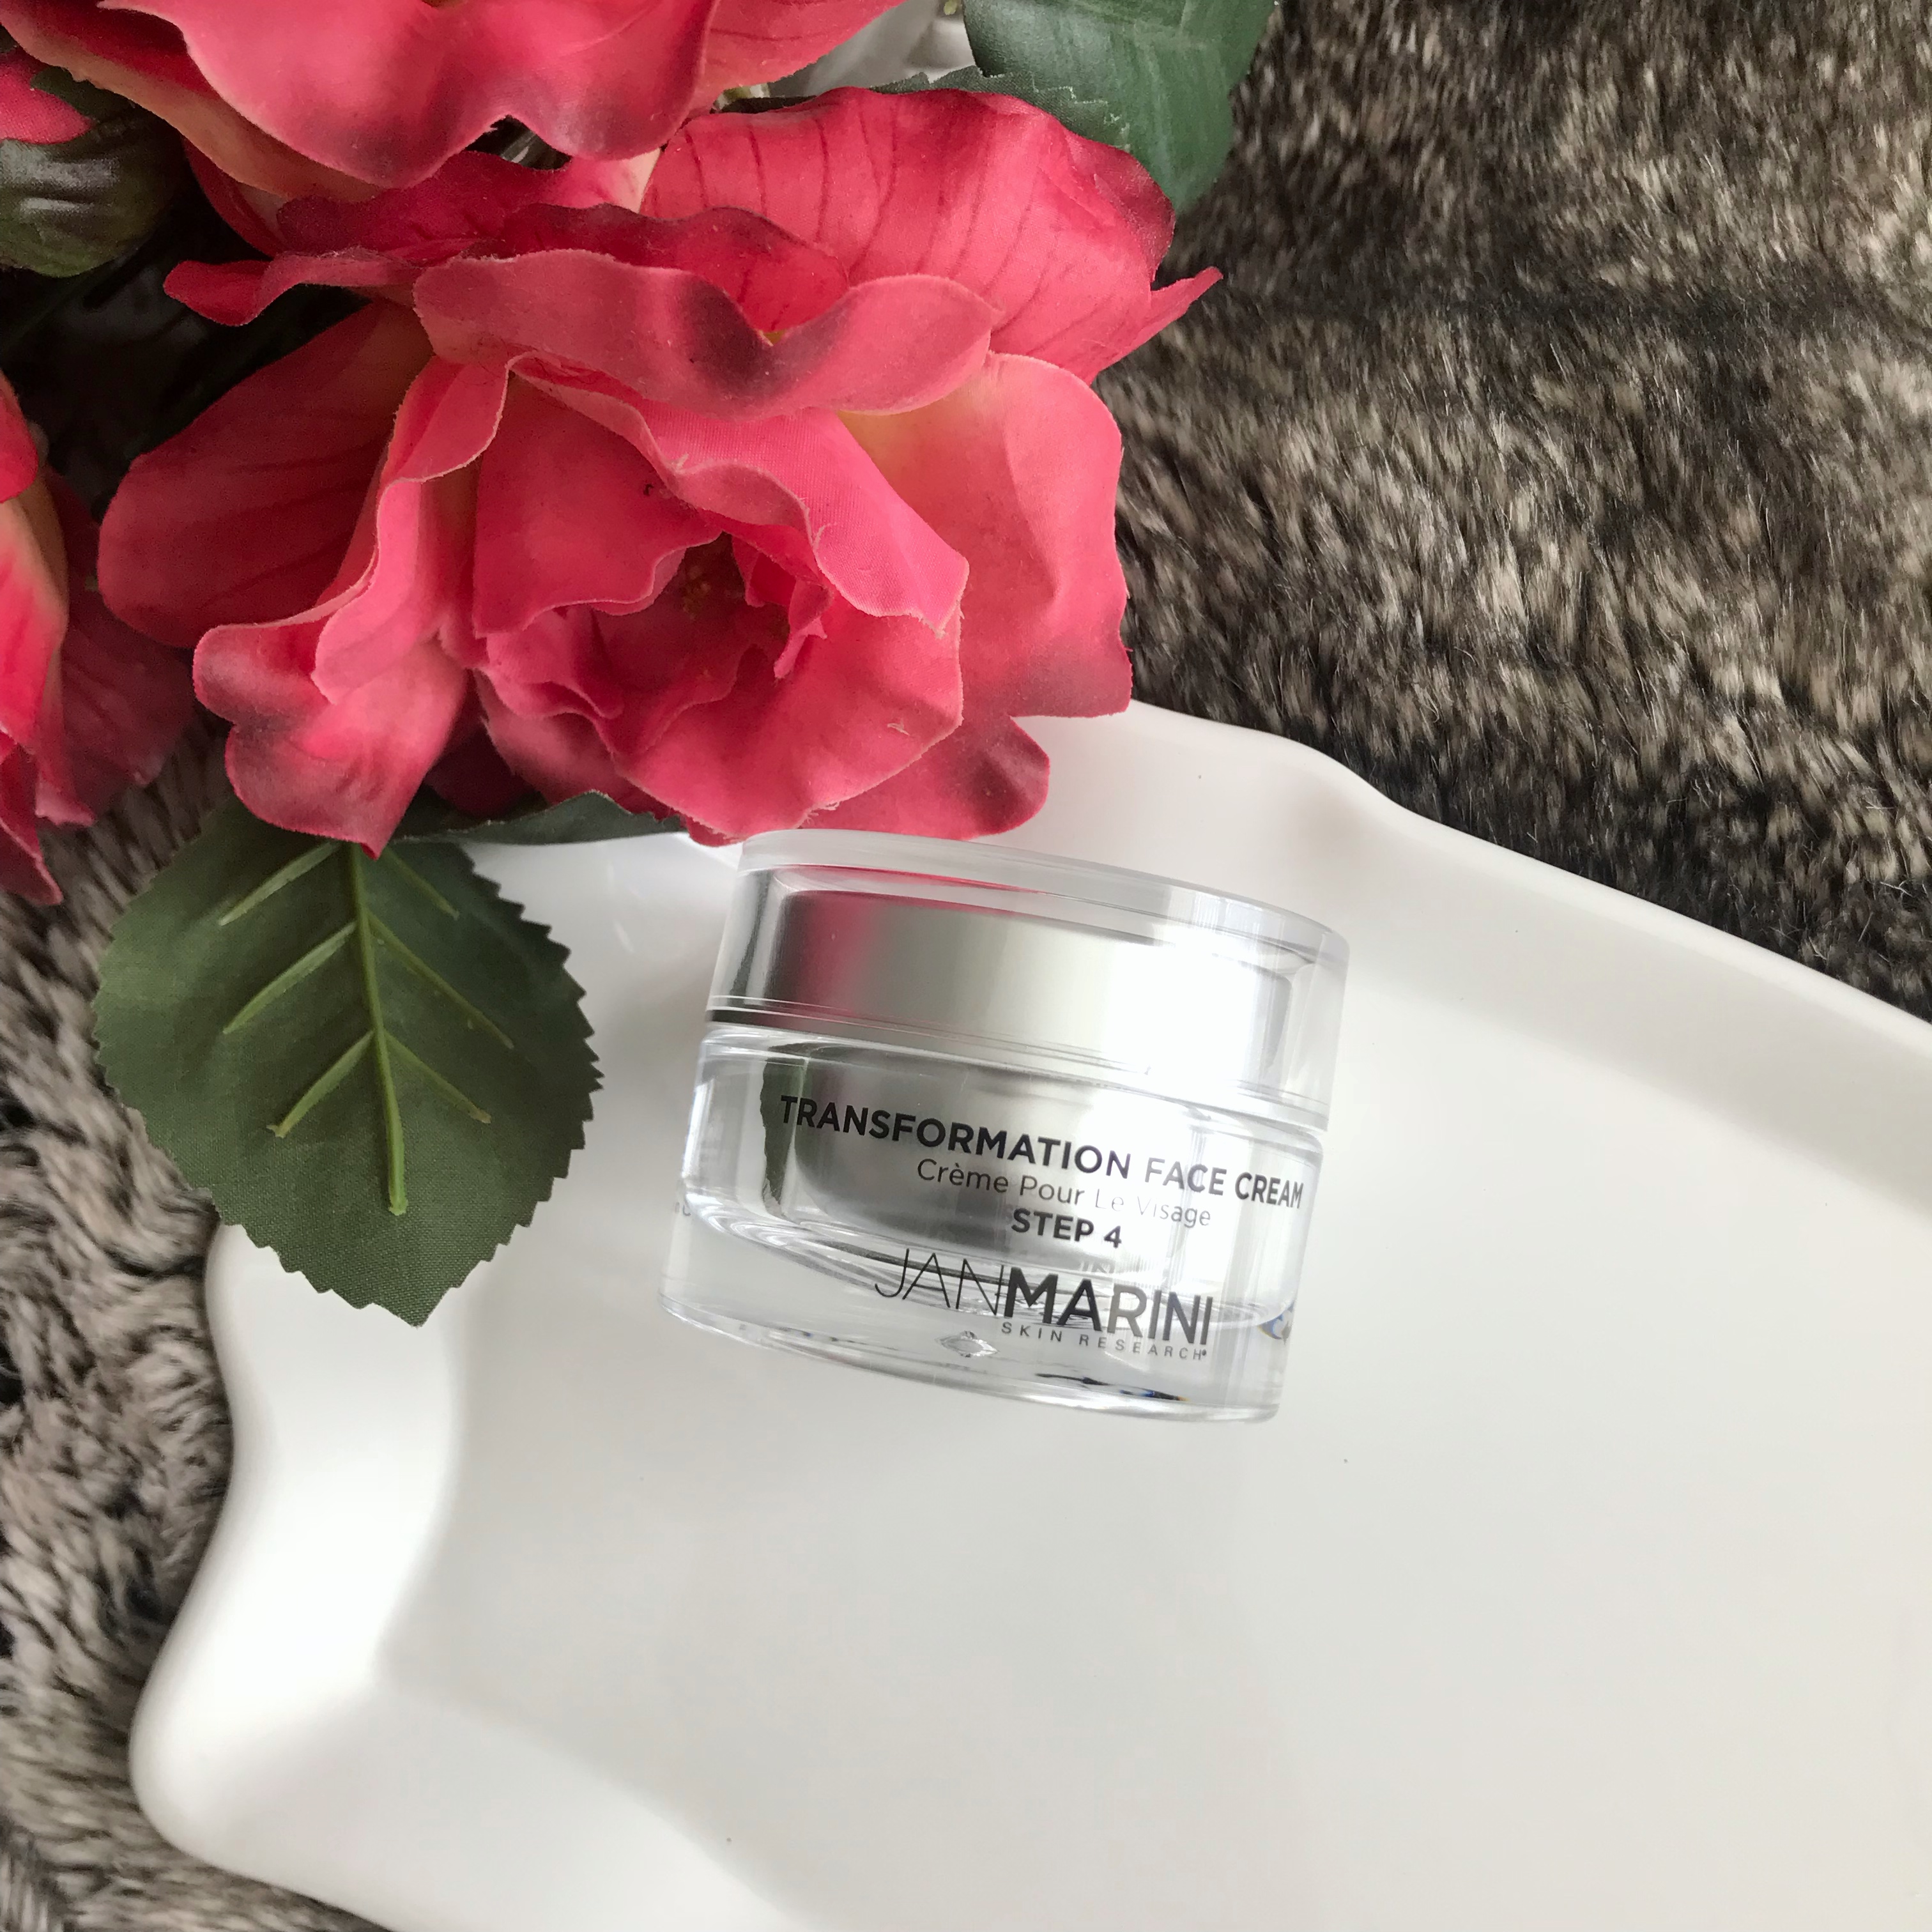 Jan Marini Transformation Face Cream Review and Experience 